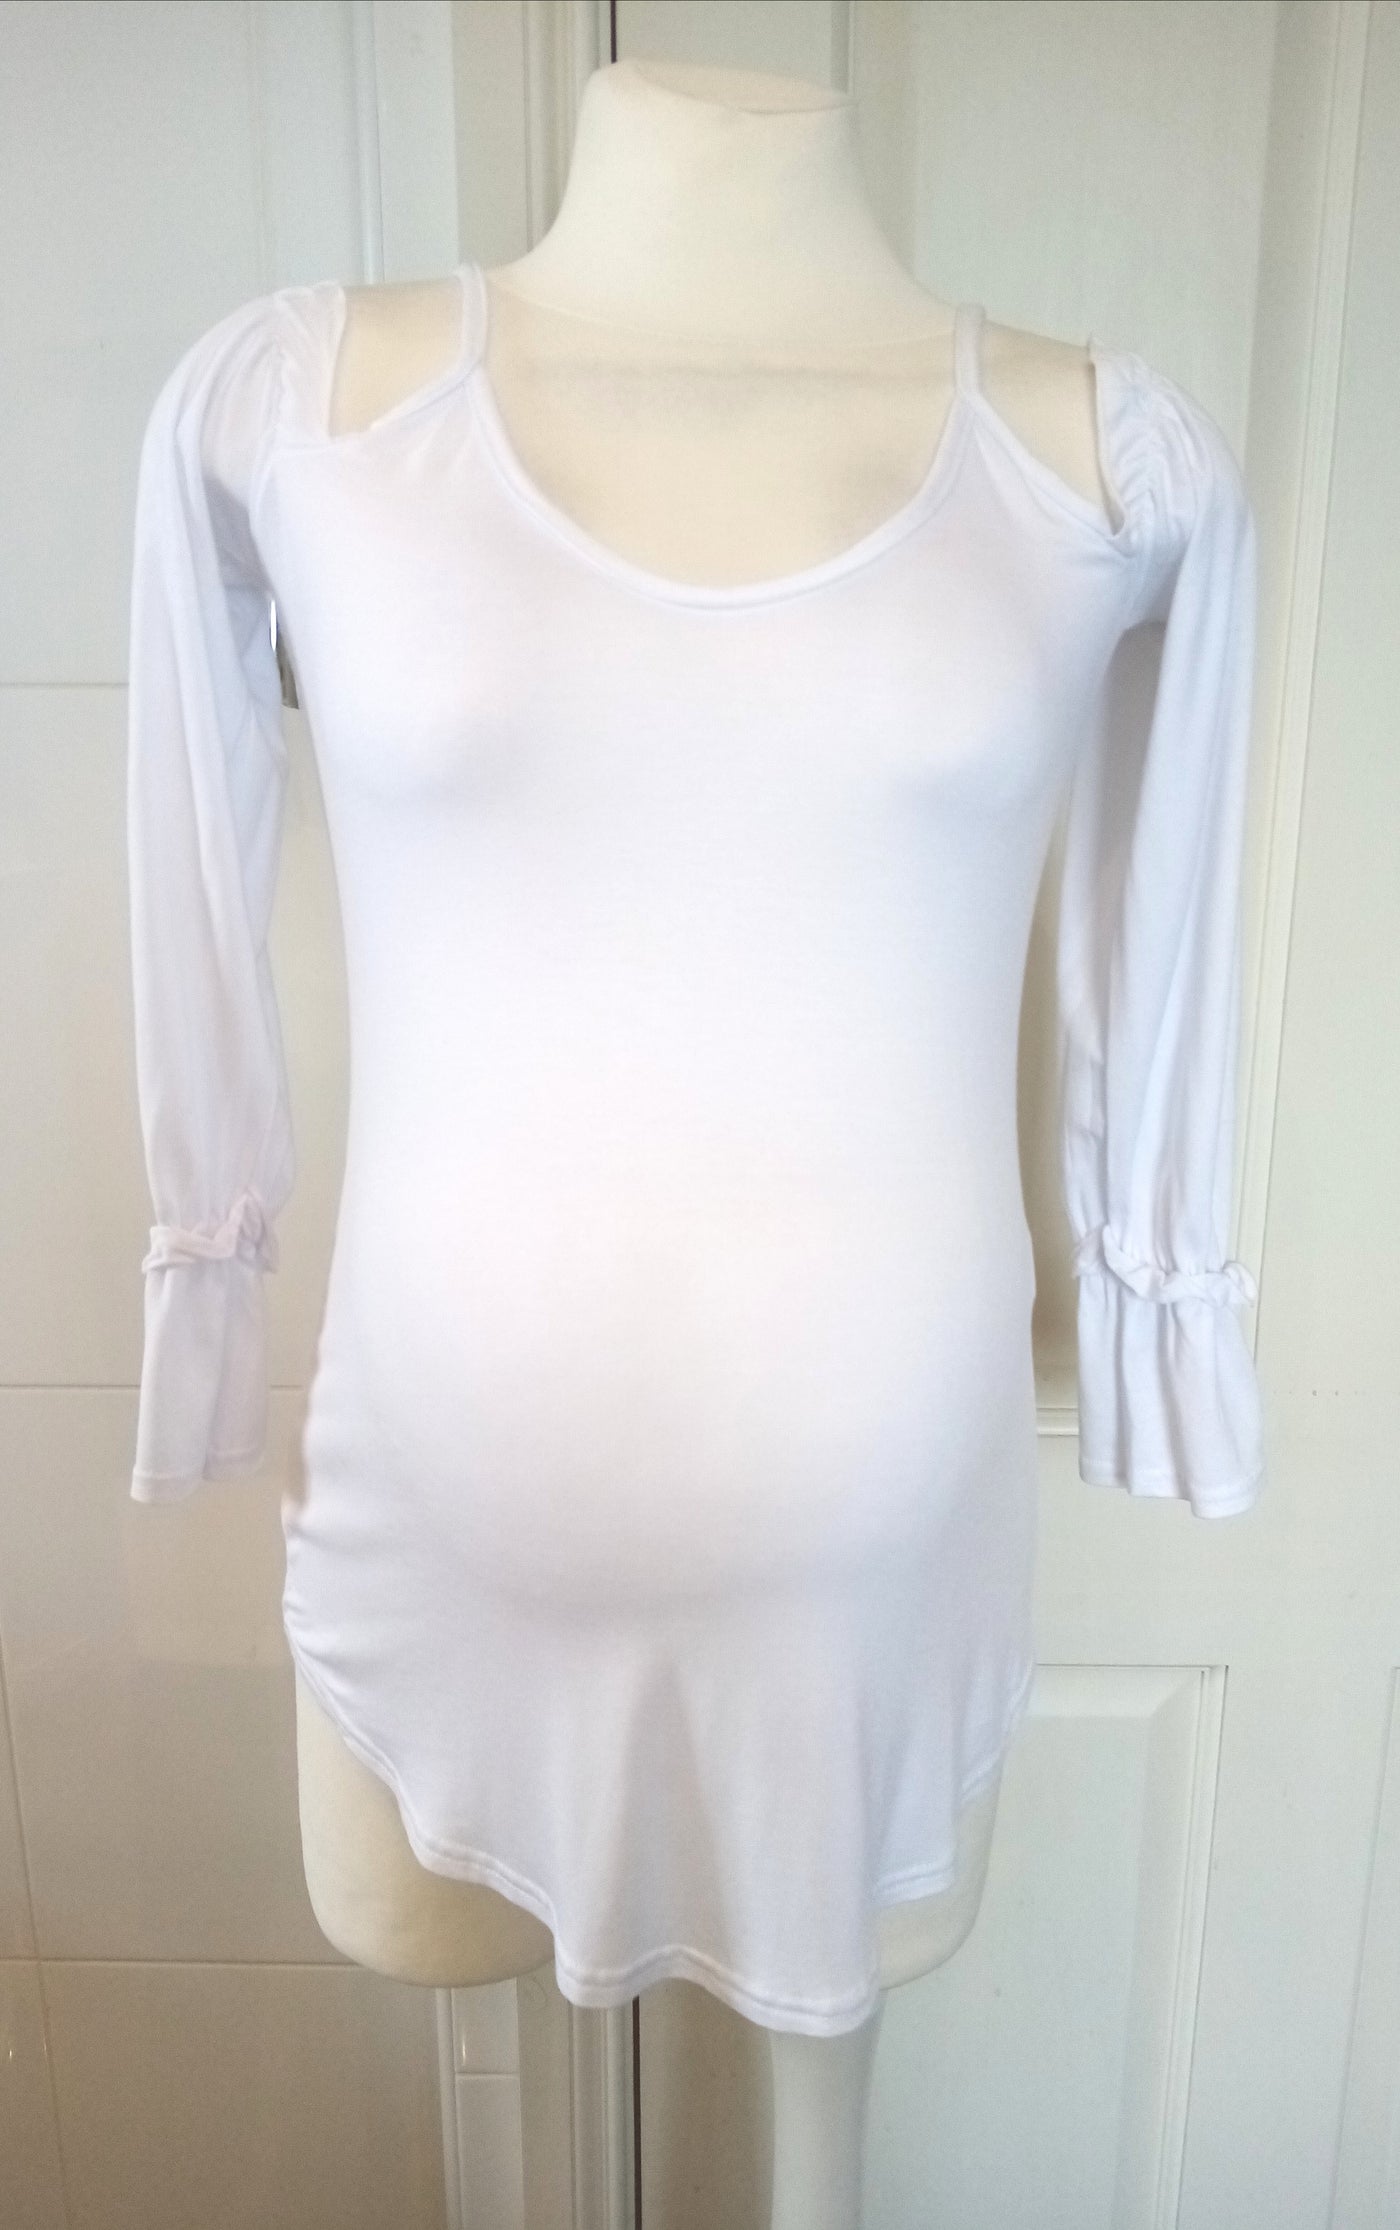 Boohoo Maternity White Cold Shoulder Top - Size 8